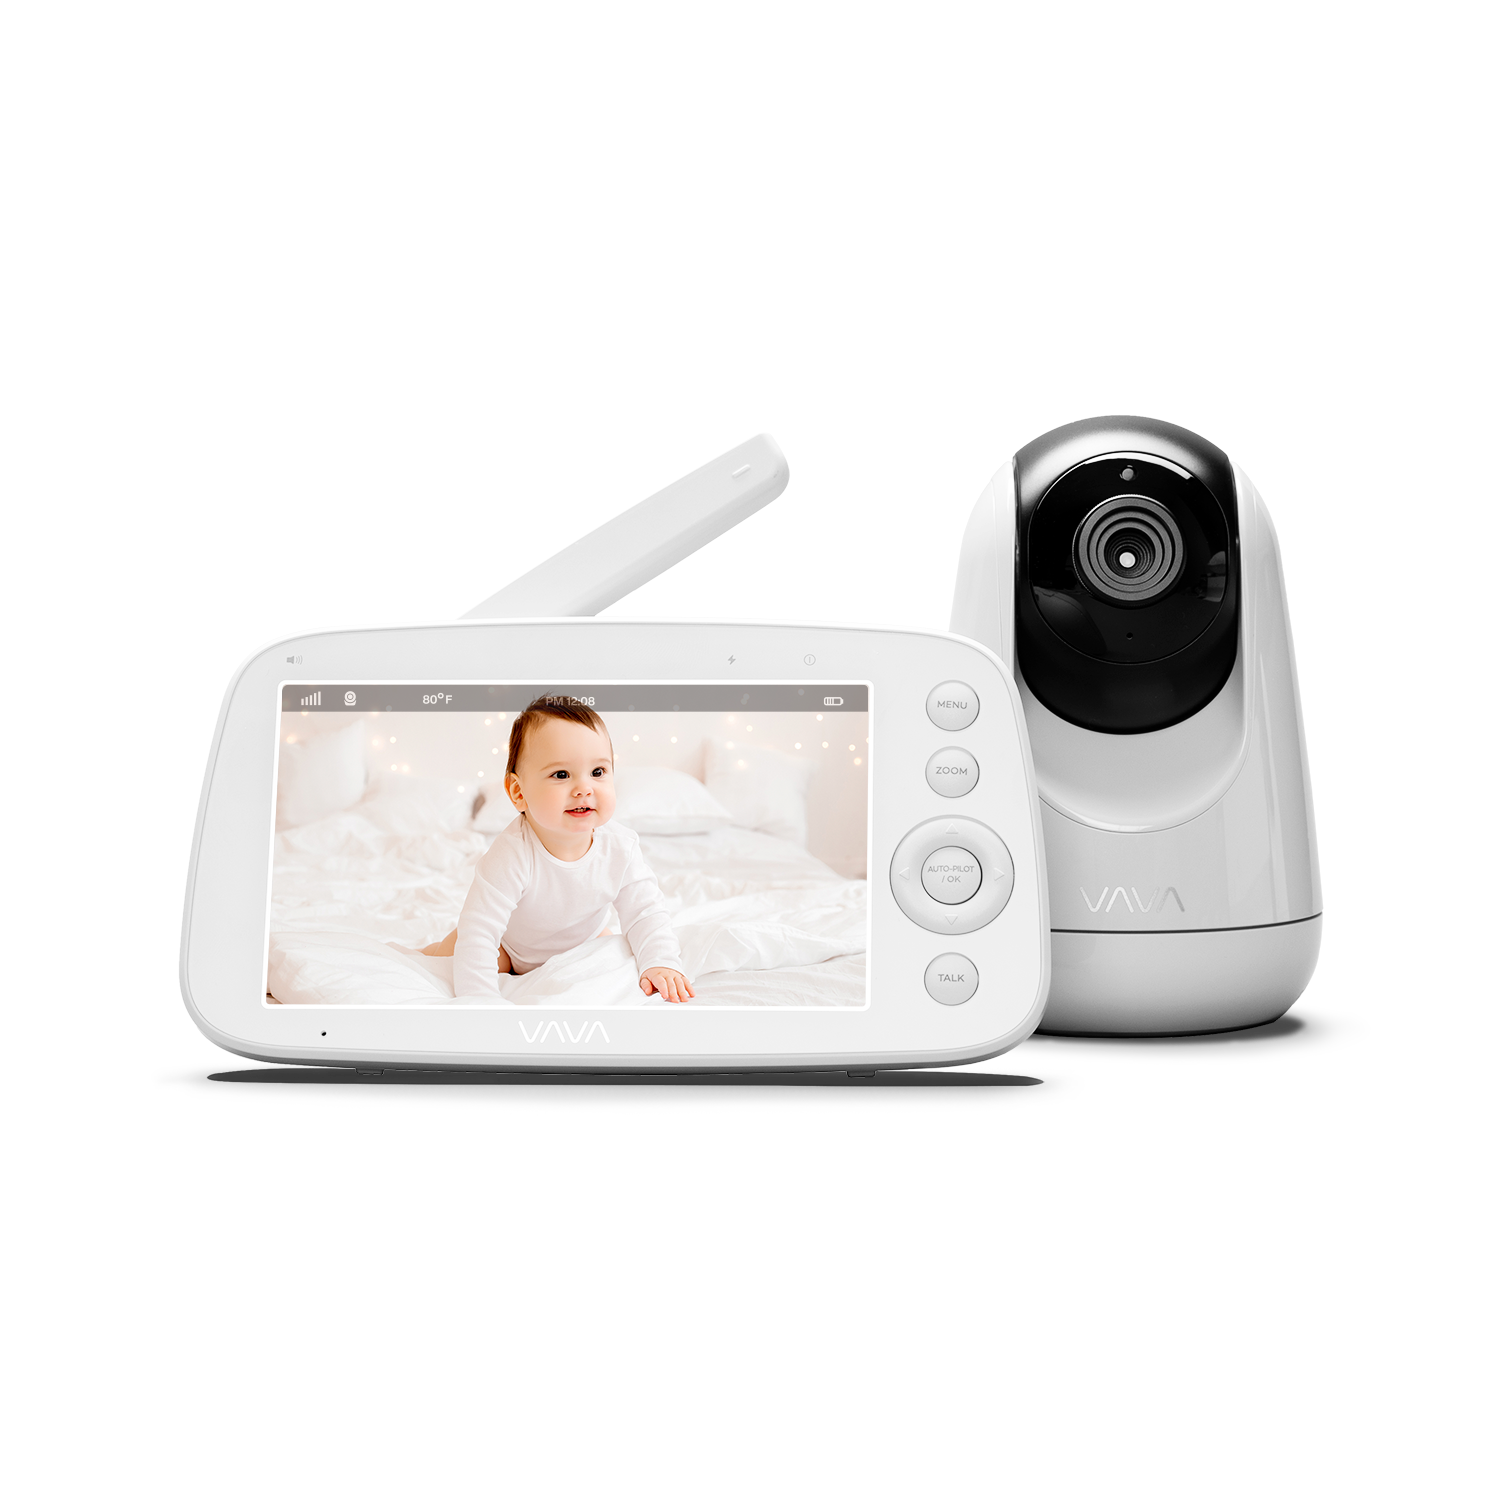 VAVA baby monitor and camera in white with new color options below